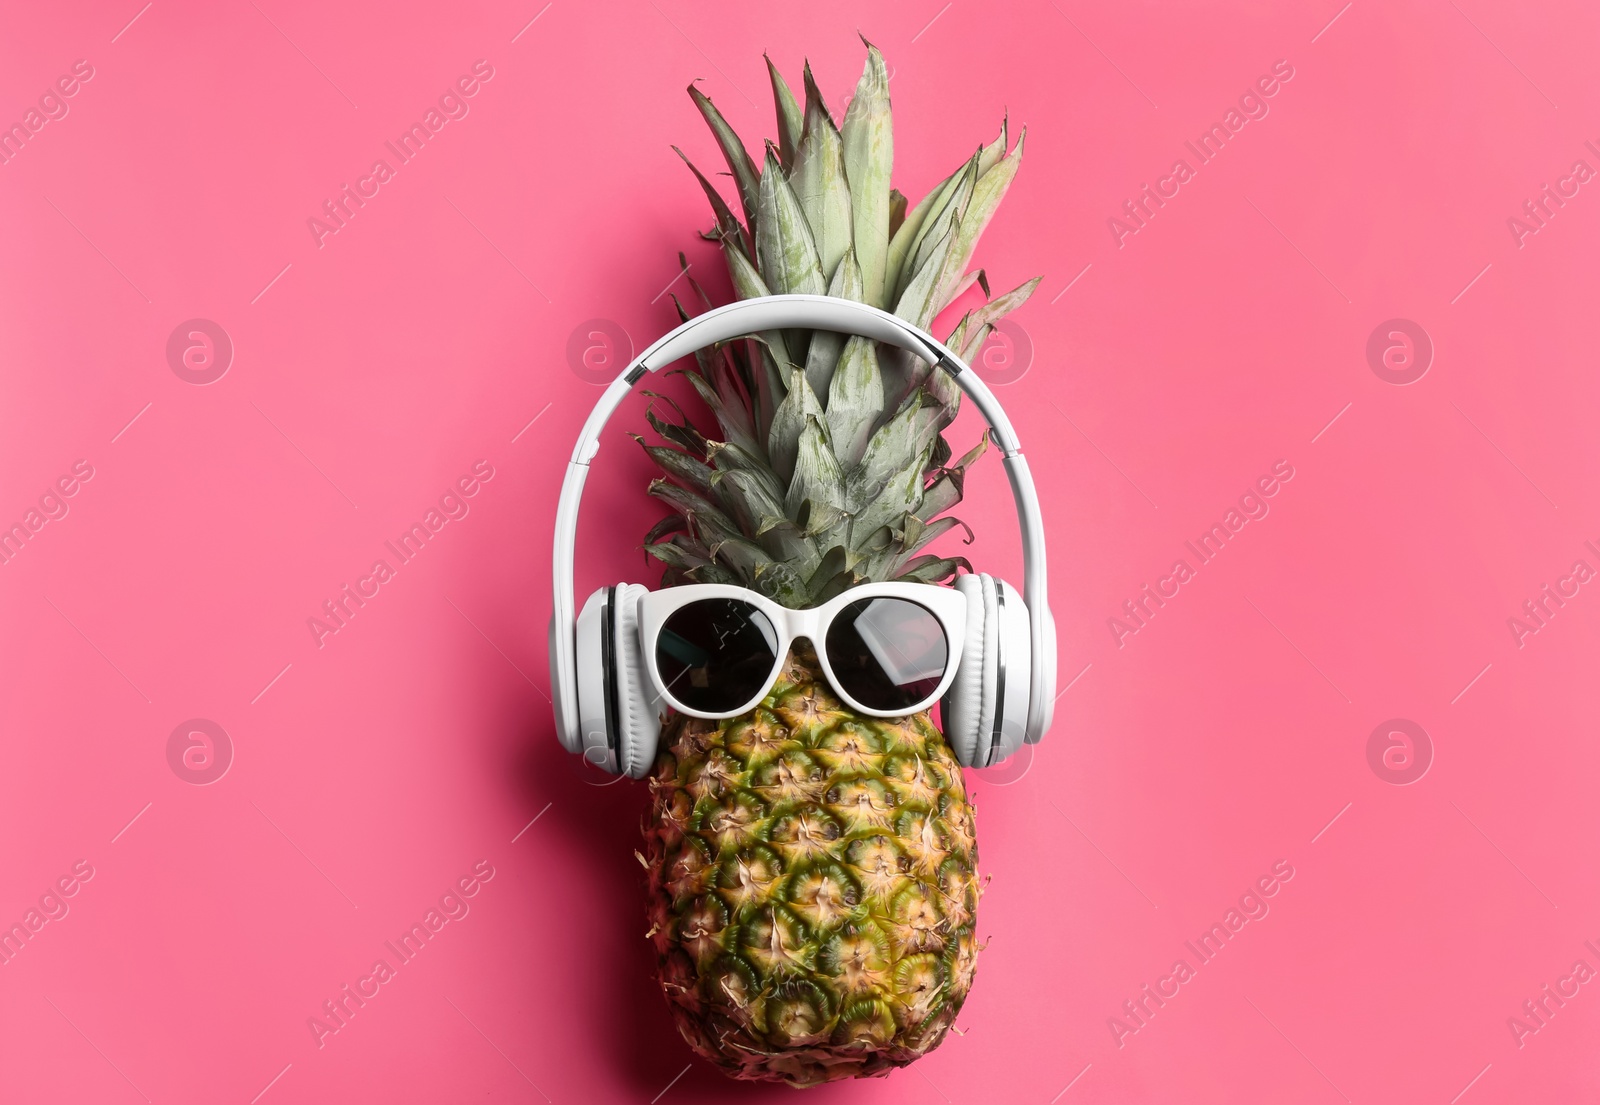 Photo of Pineapple with sunglasses and headphones on pink background, top view. Creative concept